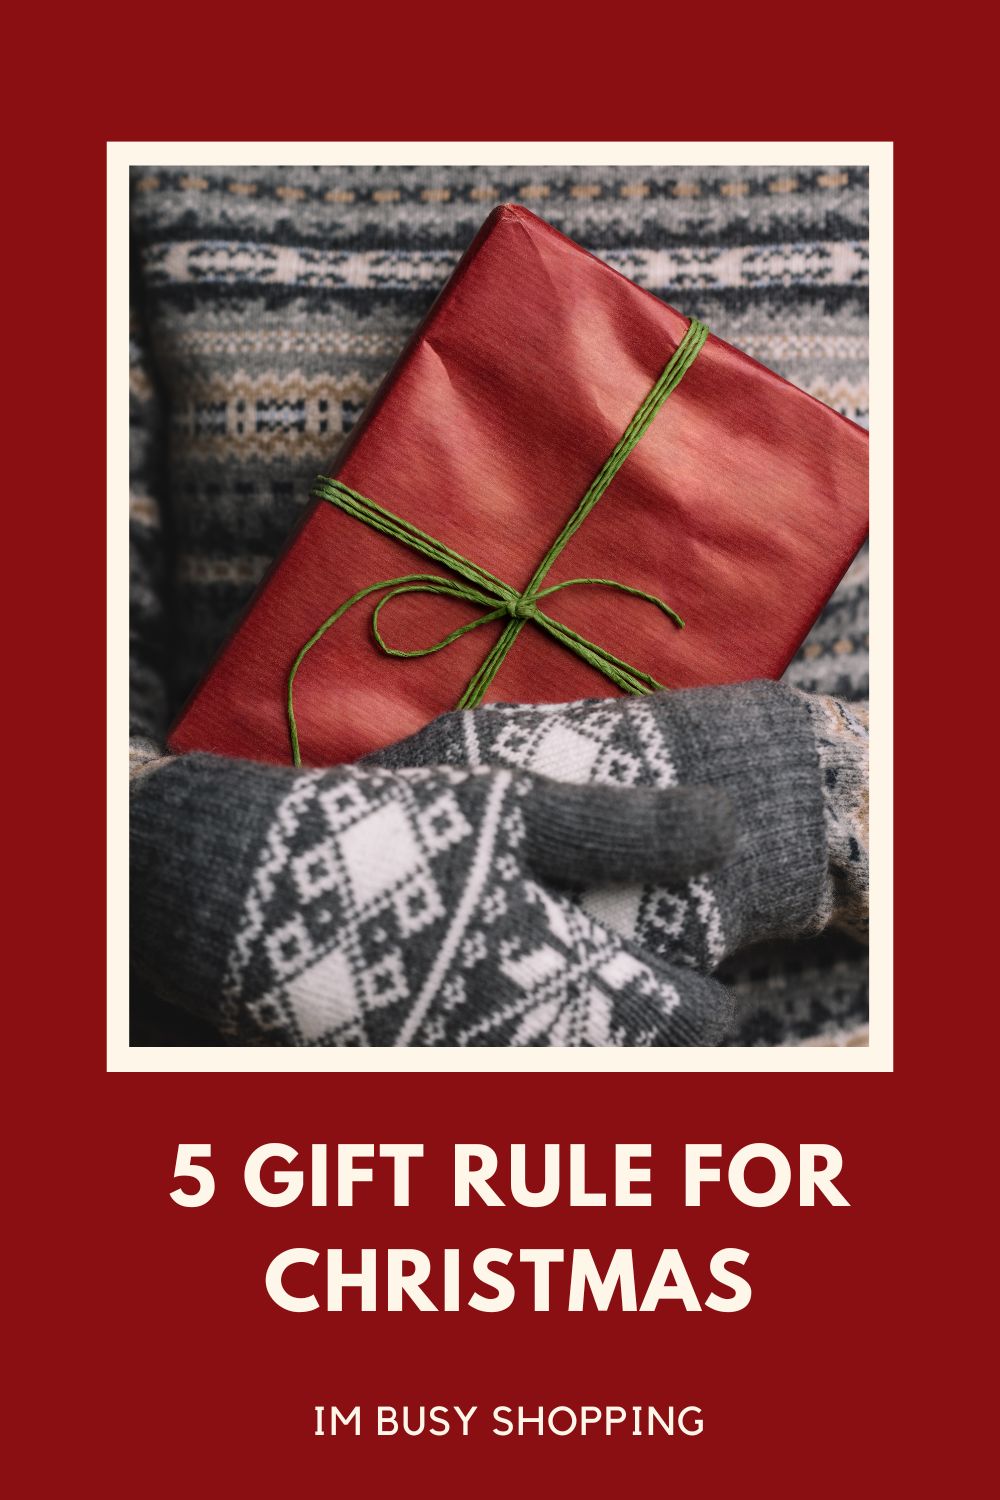 pin image for 5 gift rule for Christmas 